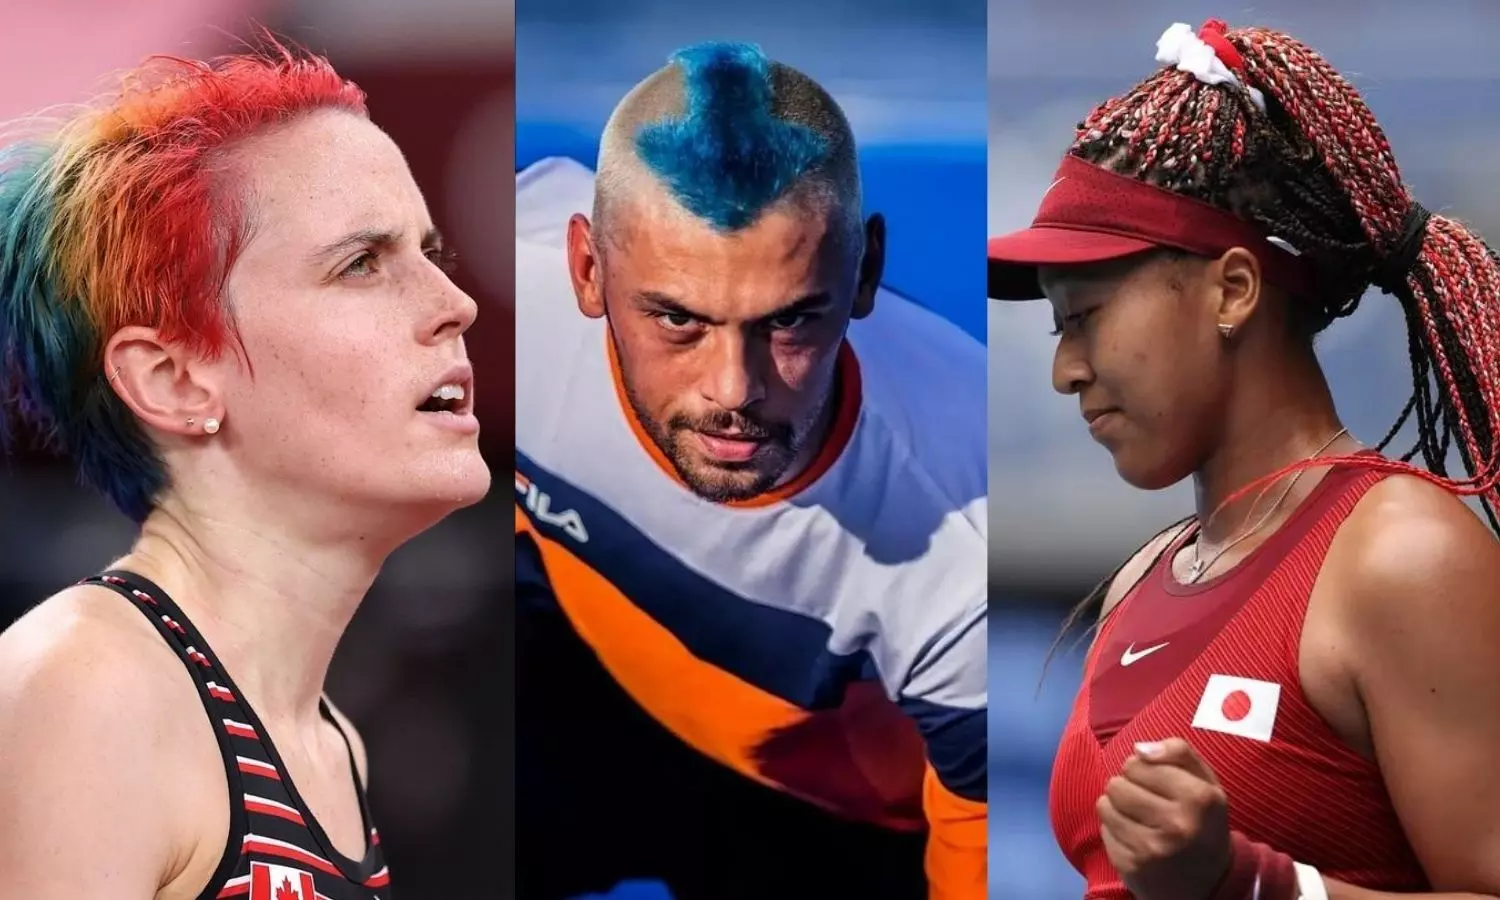 13 best hairstyles that caught our eye from the Tokyo Olympics